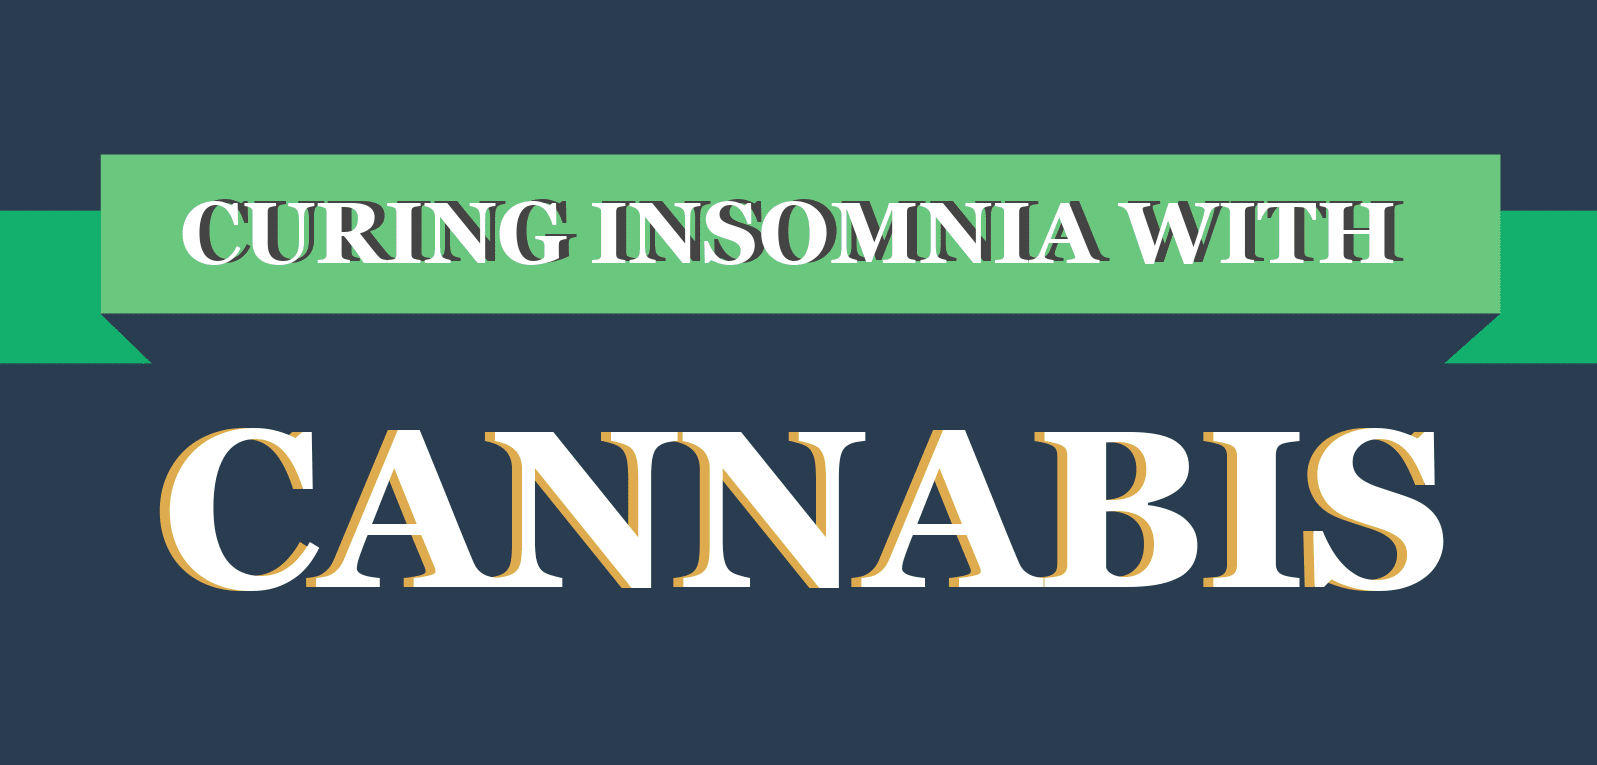 Curing Insomnia With Cannabis